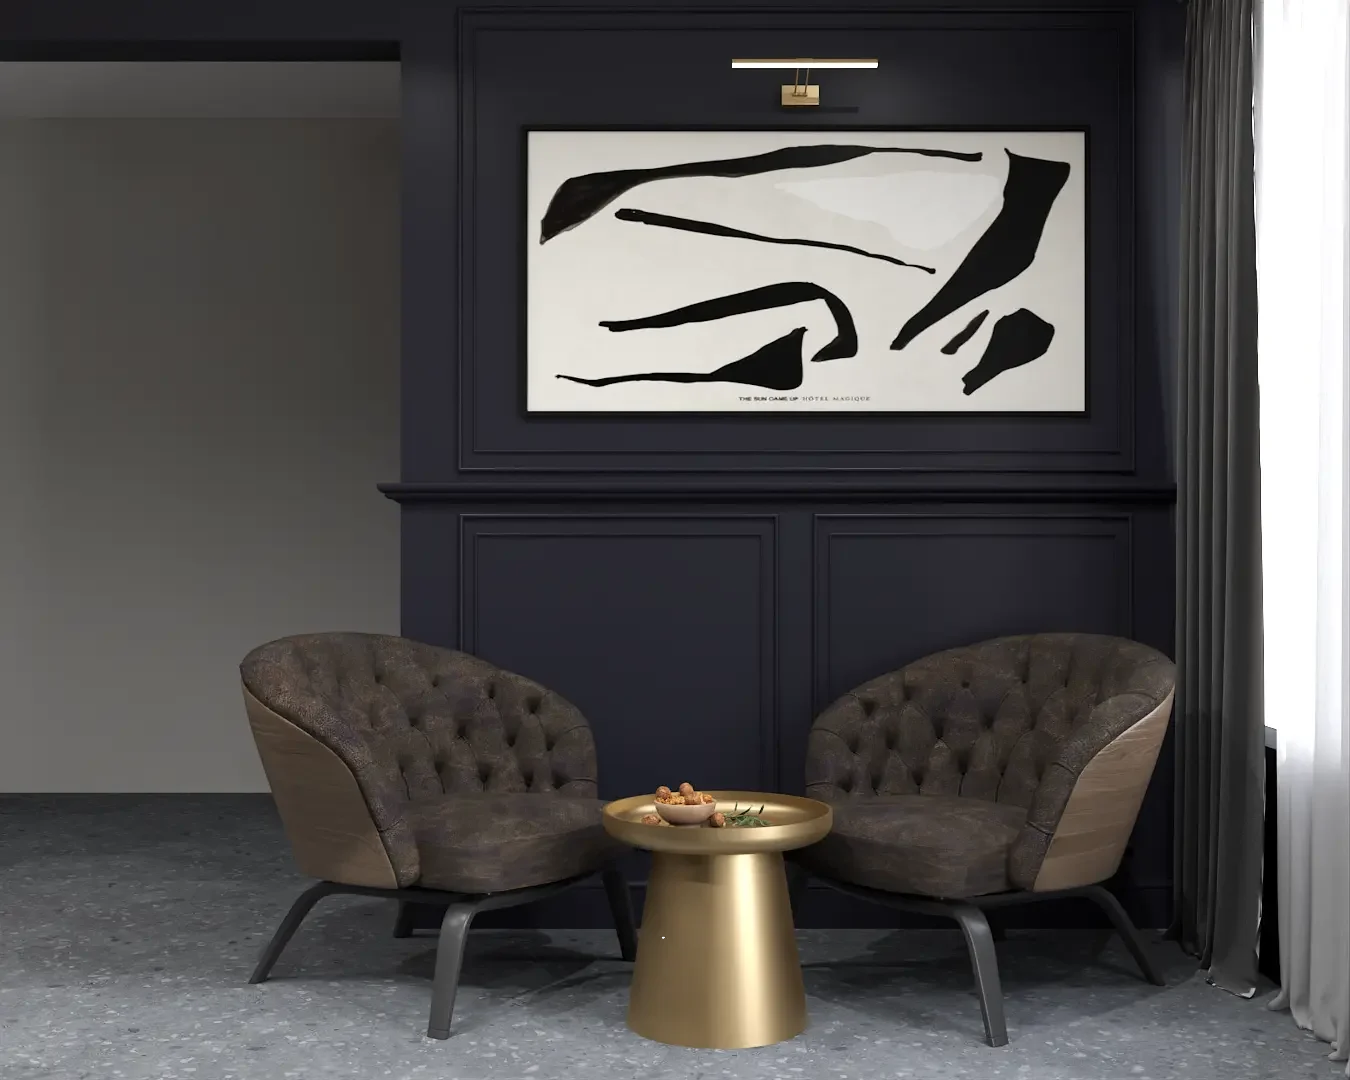 A chic sitting area with two plush dark chairs, a gold accent table, and modern black and white artwork on a navy paneled wall. The design exudes elegance and sophistication. Design by Debora, an online interior design service.